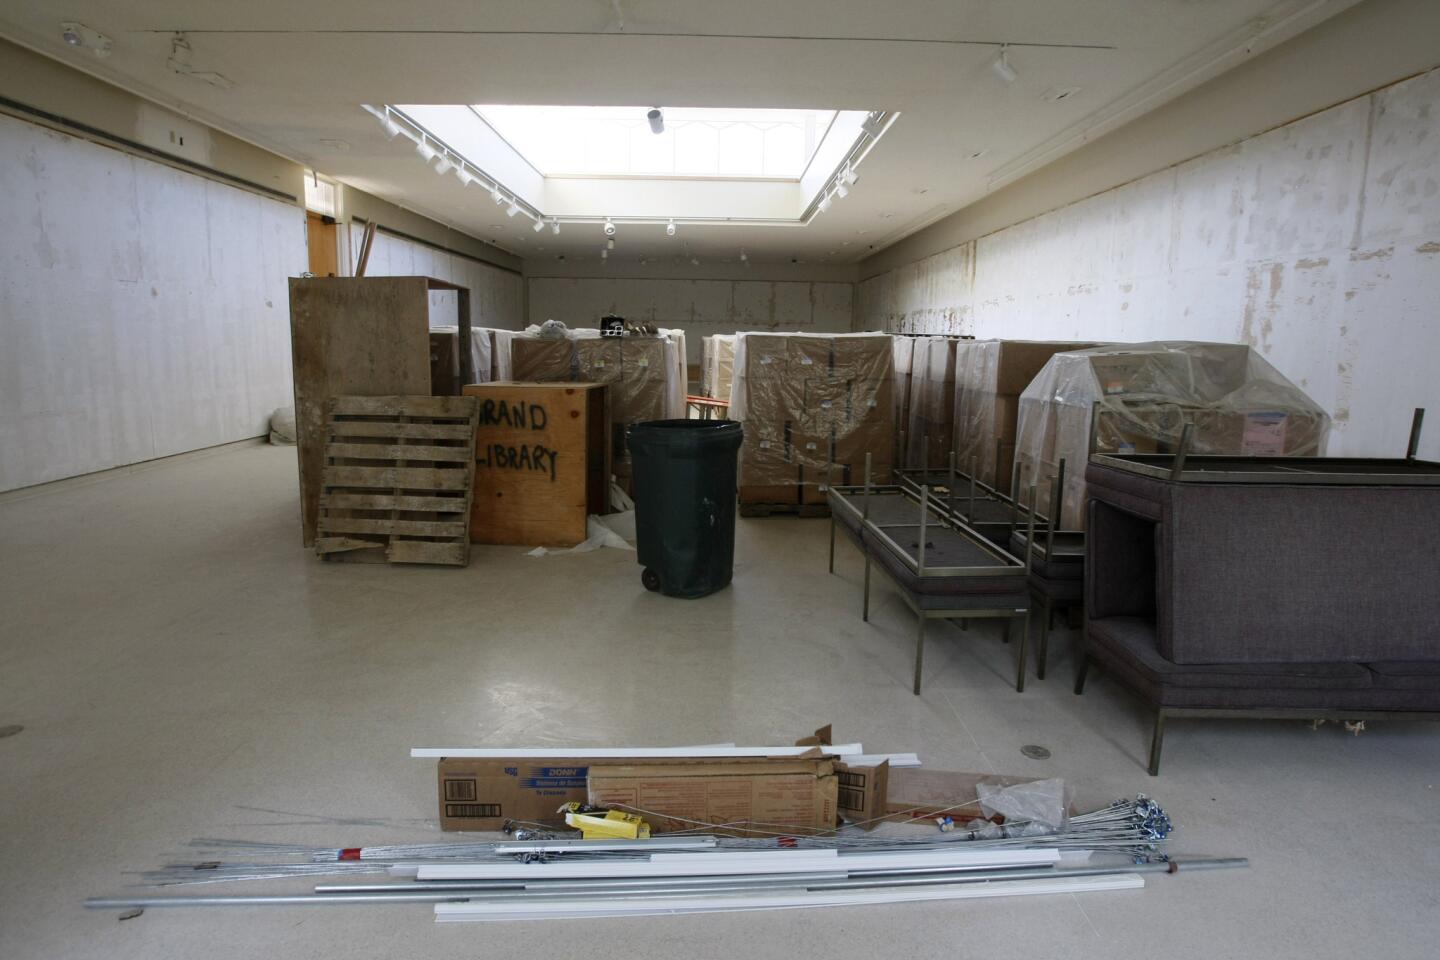 Photo Gallery: Brand Library renovations continue